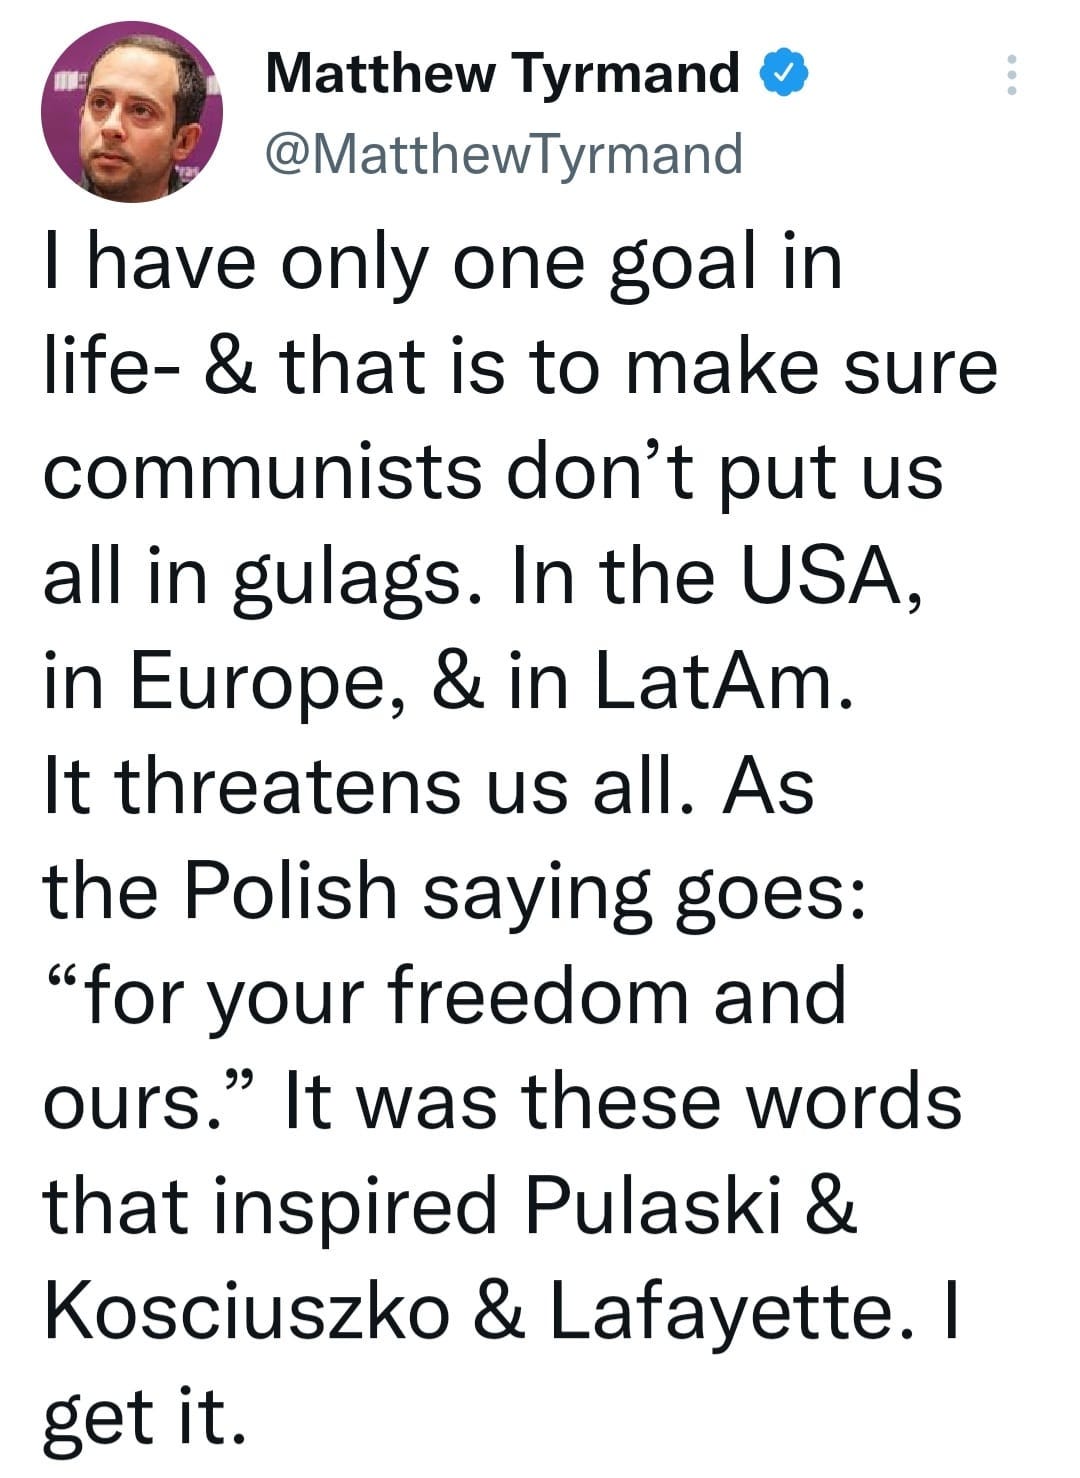 May be an image of 1 person and text that says 'Matthew Tyrmand @MatthewTyrmand I have only one goal in life- & that is to make sure communists don't put us all in gulags. In the USA, in Europe, & in LatAm. It threatens us all. As the Polish saying goes: "for your freedom and ours." It was these words that inspired Pulaski & Kosciuszko & Lafayette. get it.'